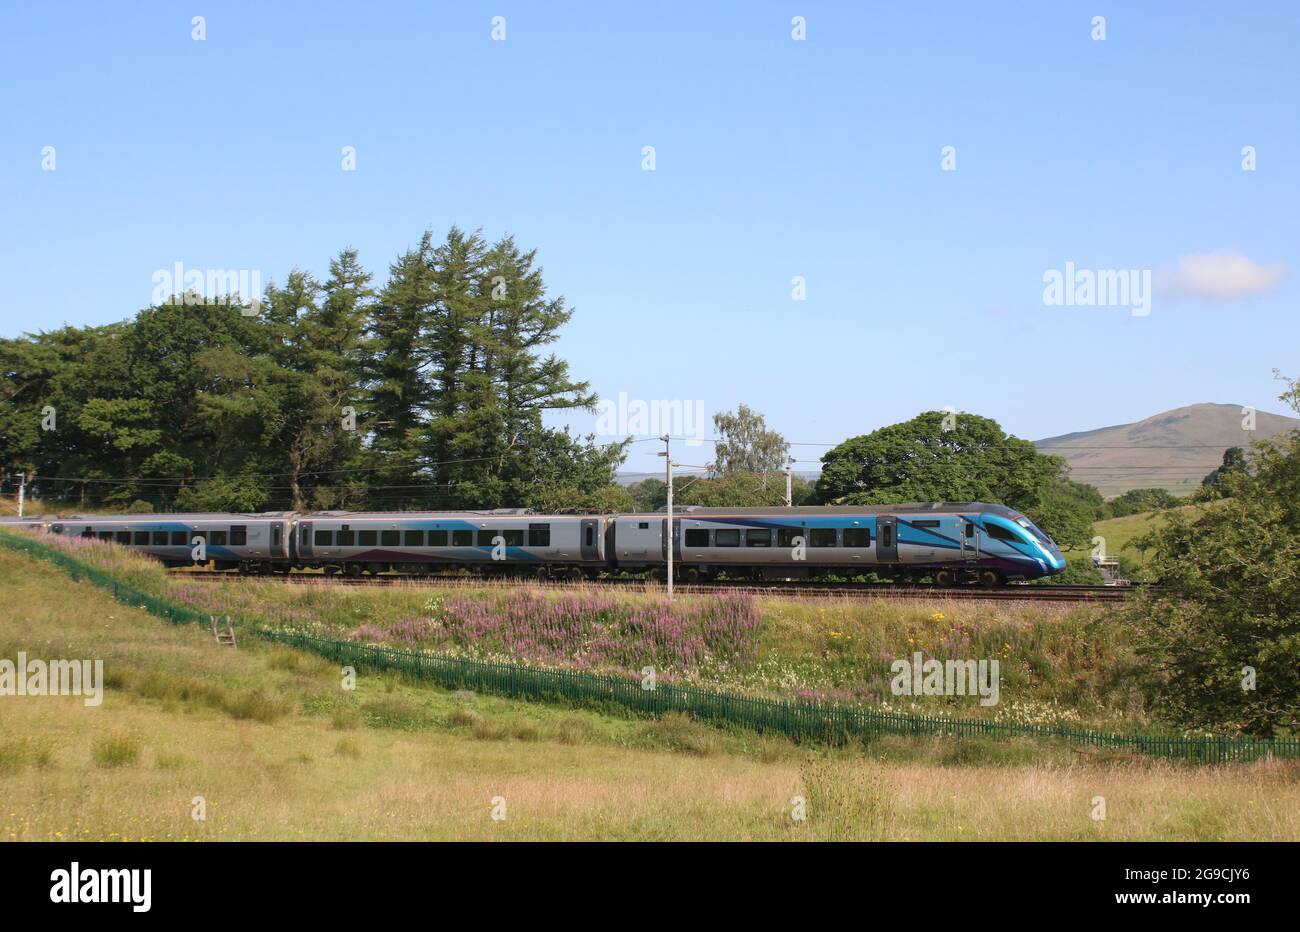 TPE liveried class 397, 397004, passing Grayrigg in Cumbria on the West Coast Main Line on 20th July 2021 with express passenger train to Edinburgh. Stock Photo